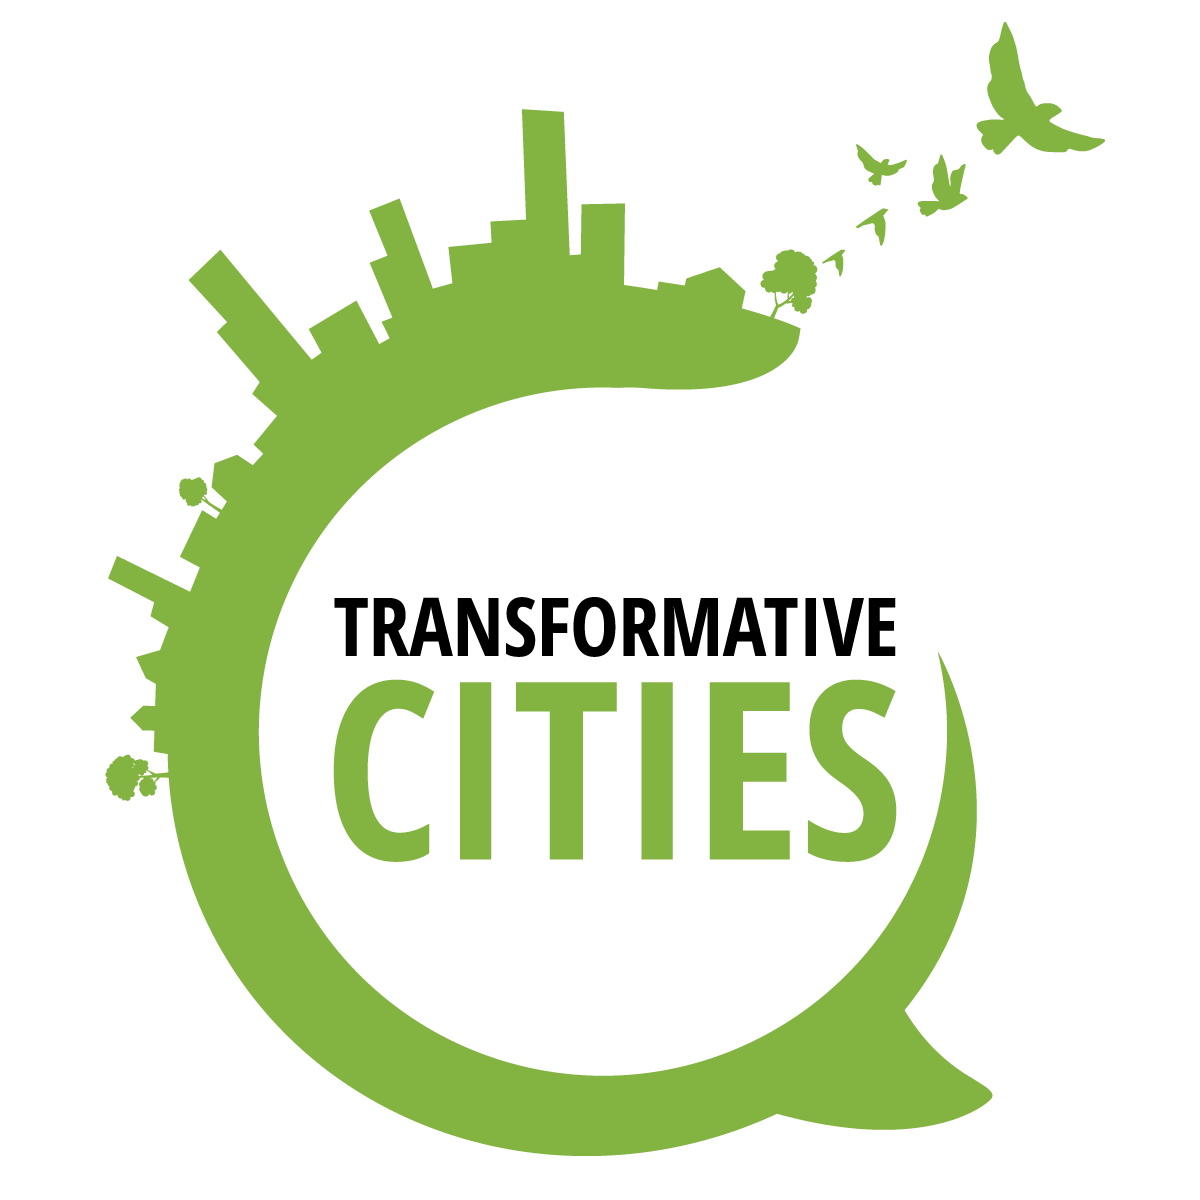 Transformative Cities Award: still time to apply